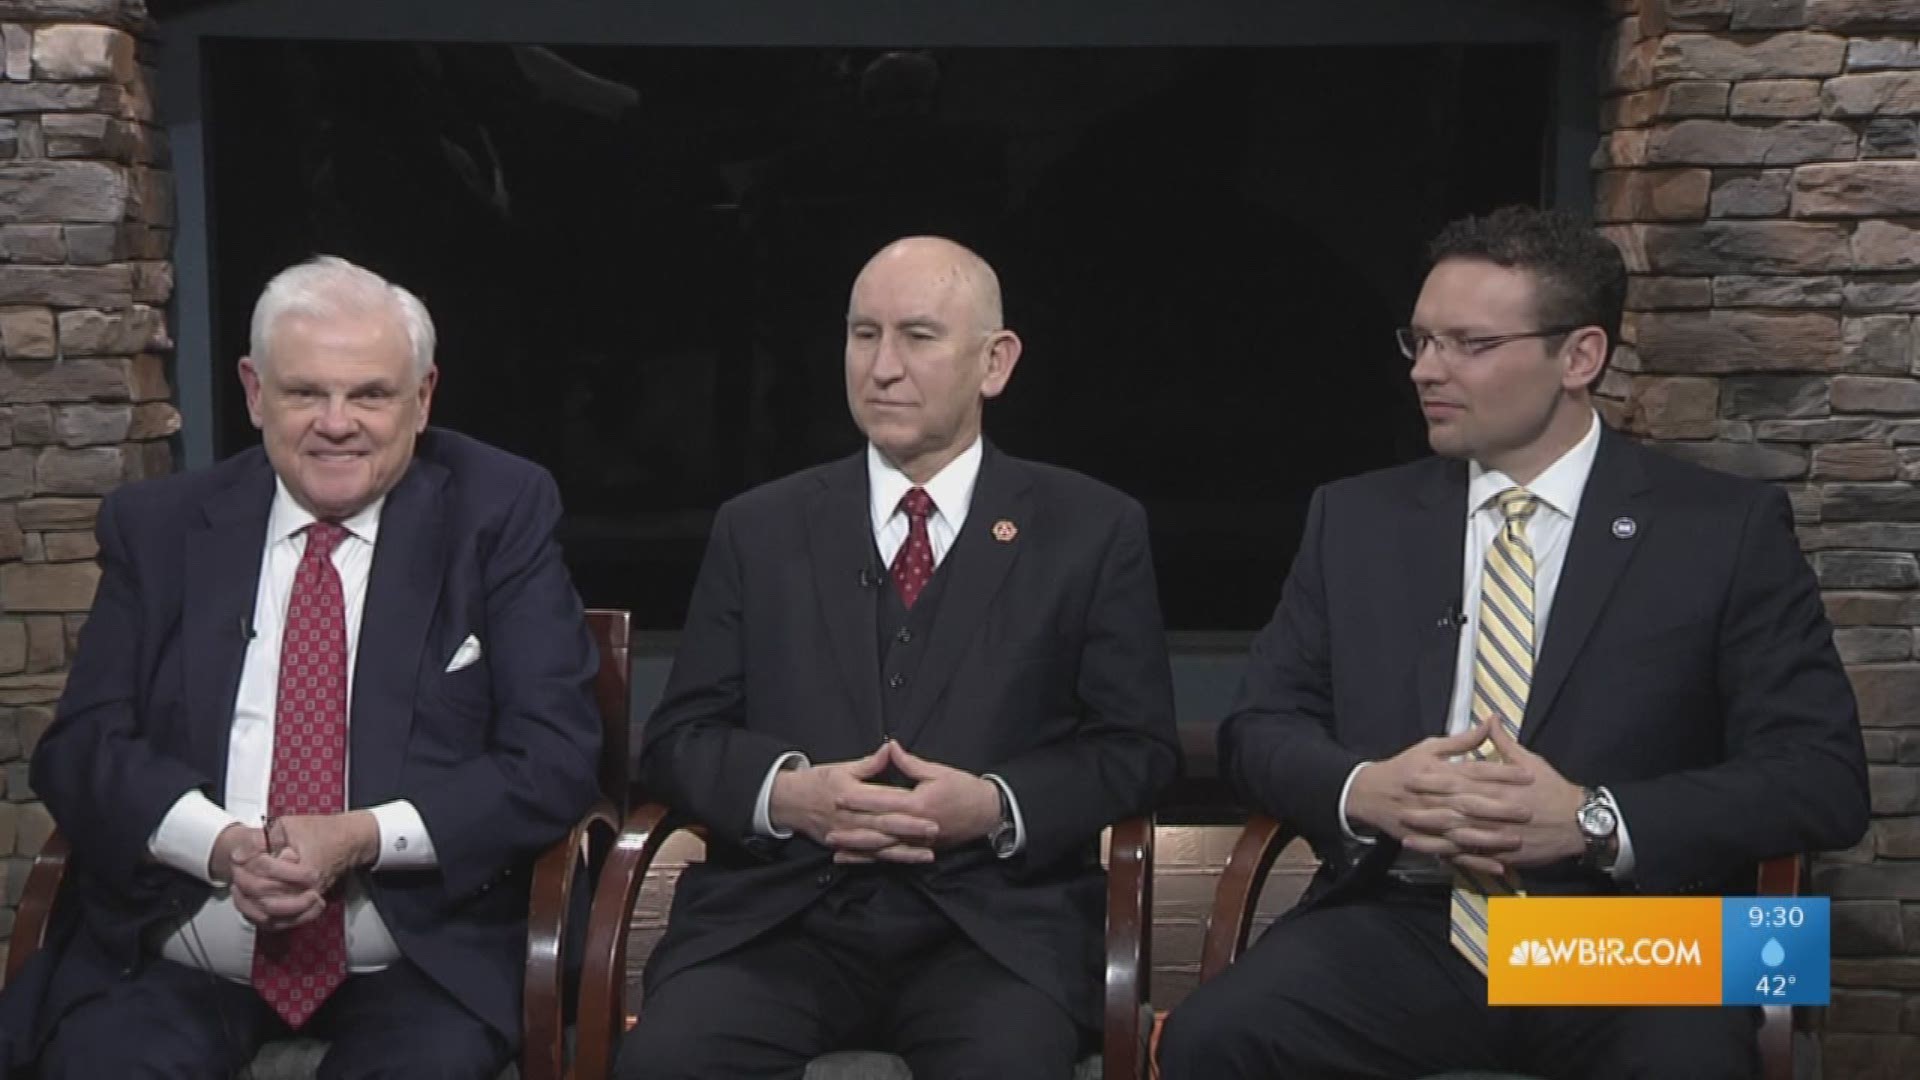 State Sens. Ken Yager and Richard Briggs and state Rep. Jason Zachary talk about the ongoing legislative session.